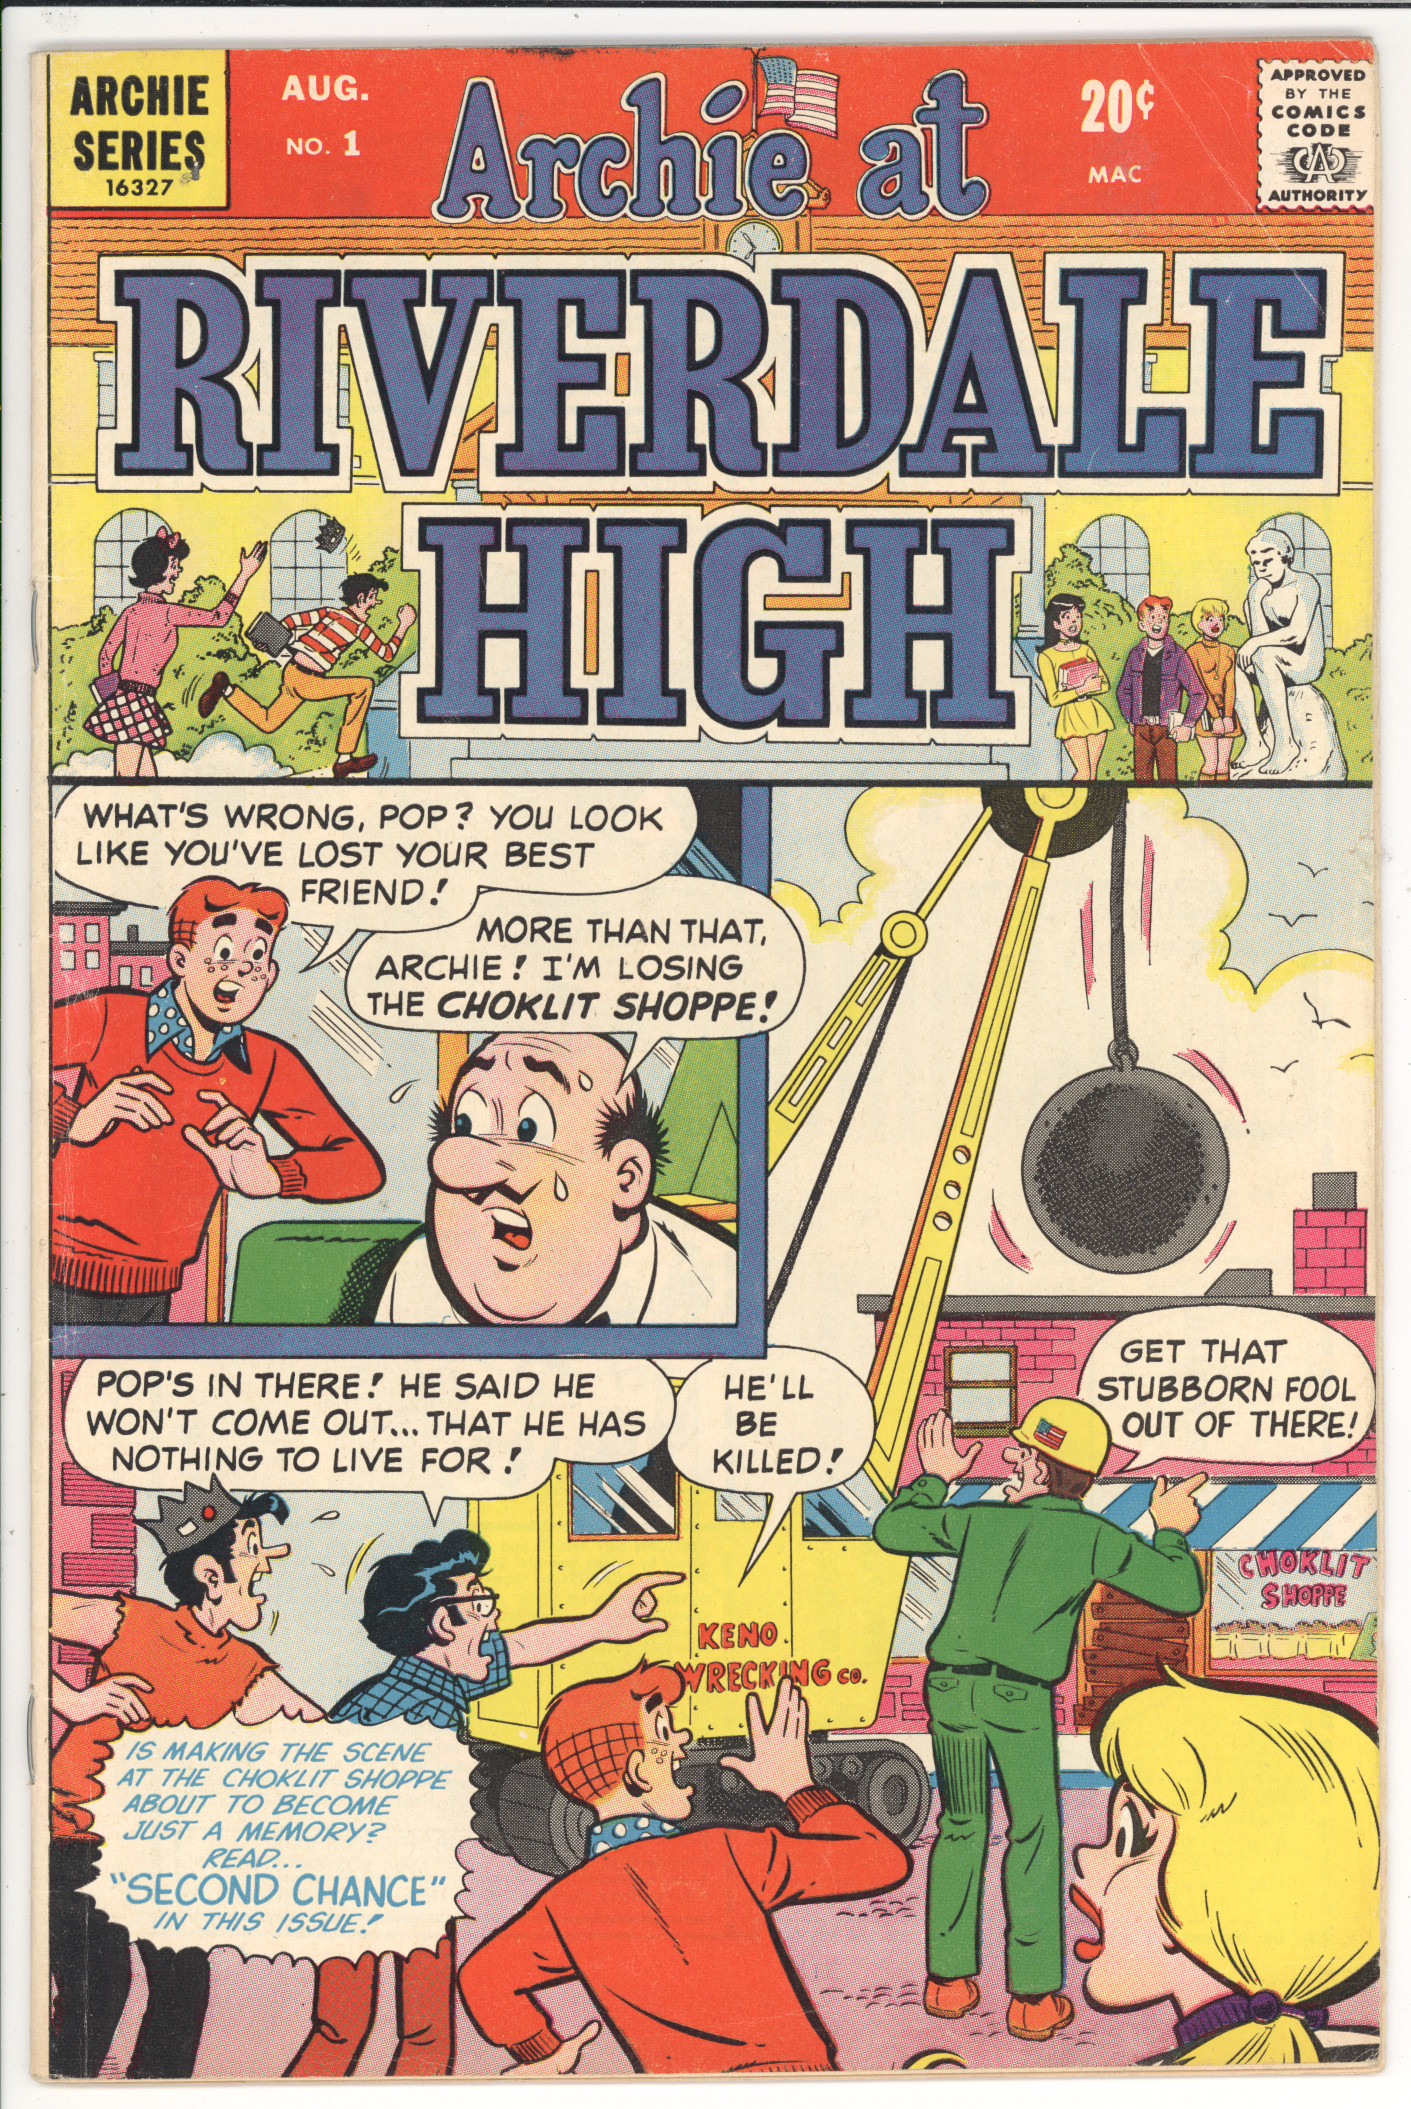 Archie at Riverdale High #1 front